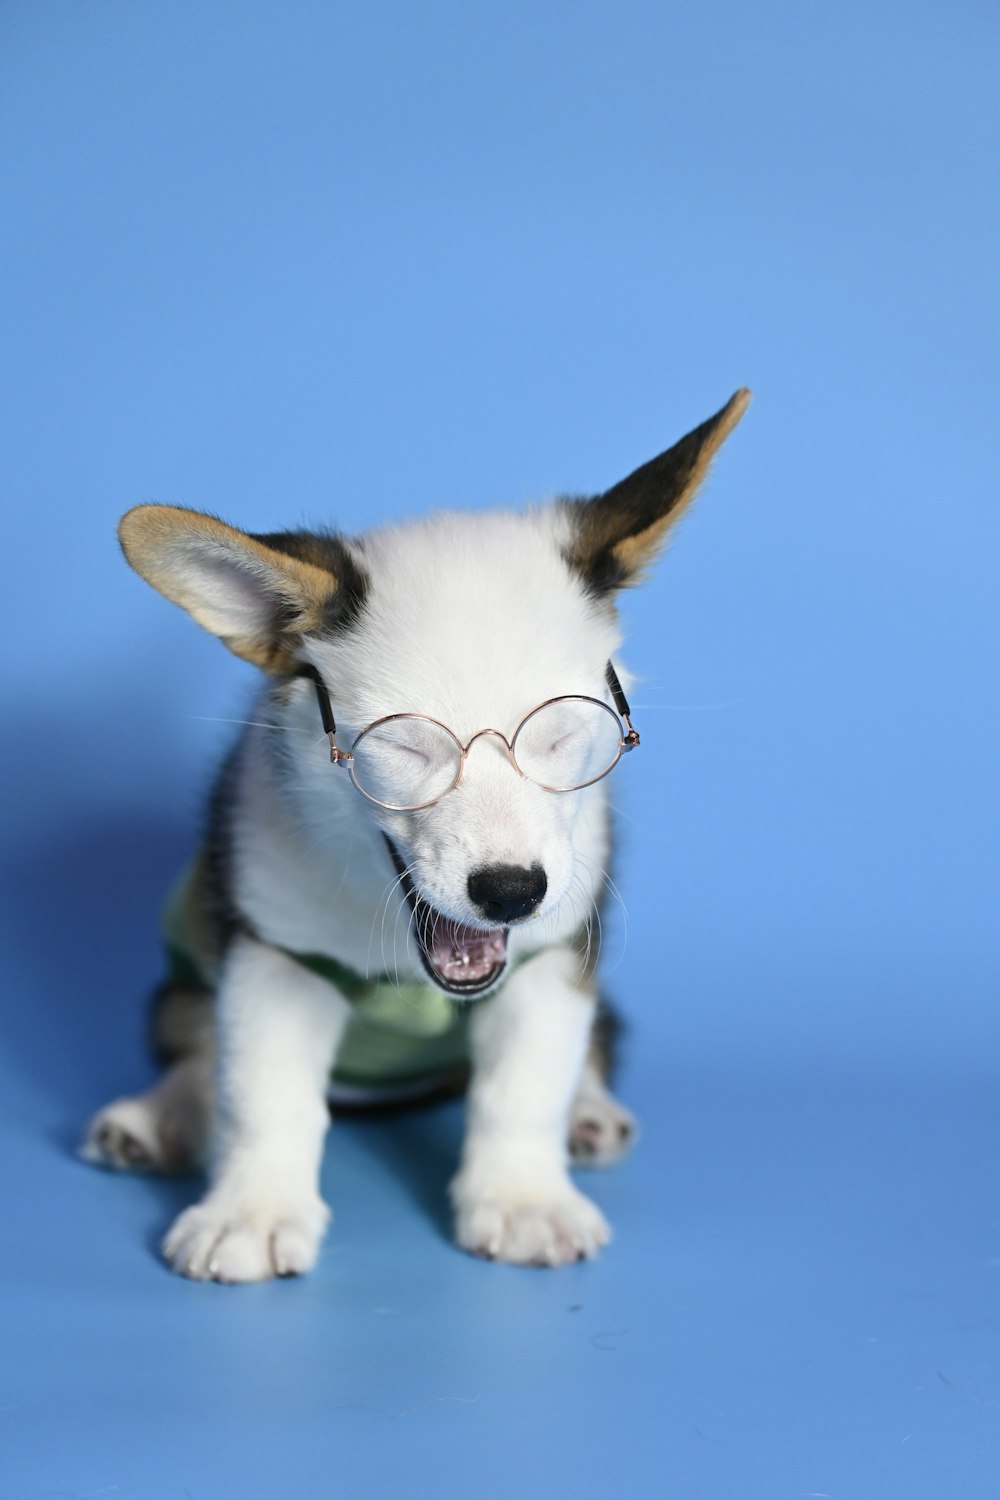 a small dog wearing glasses on a blue background